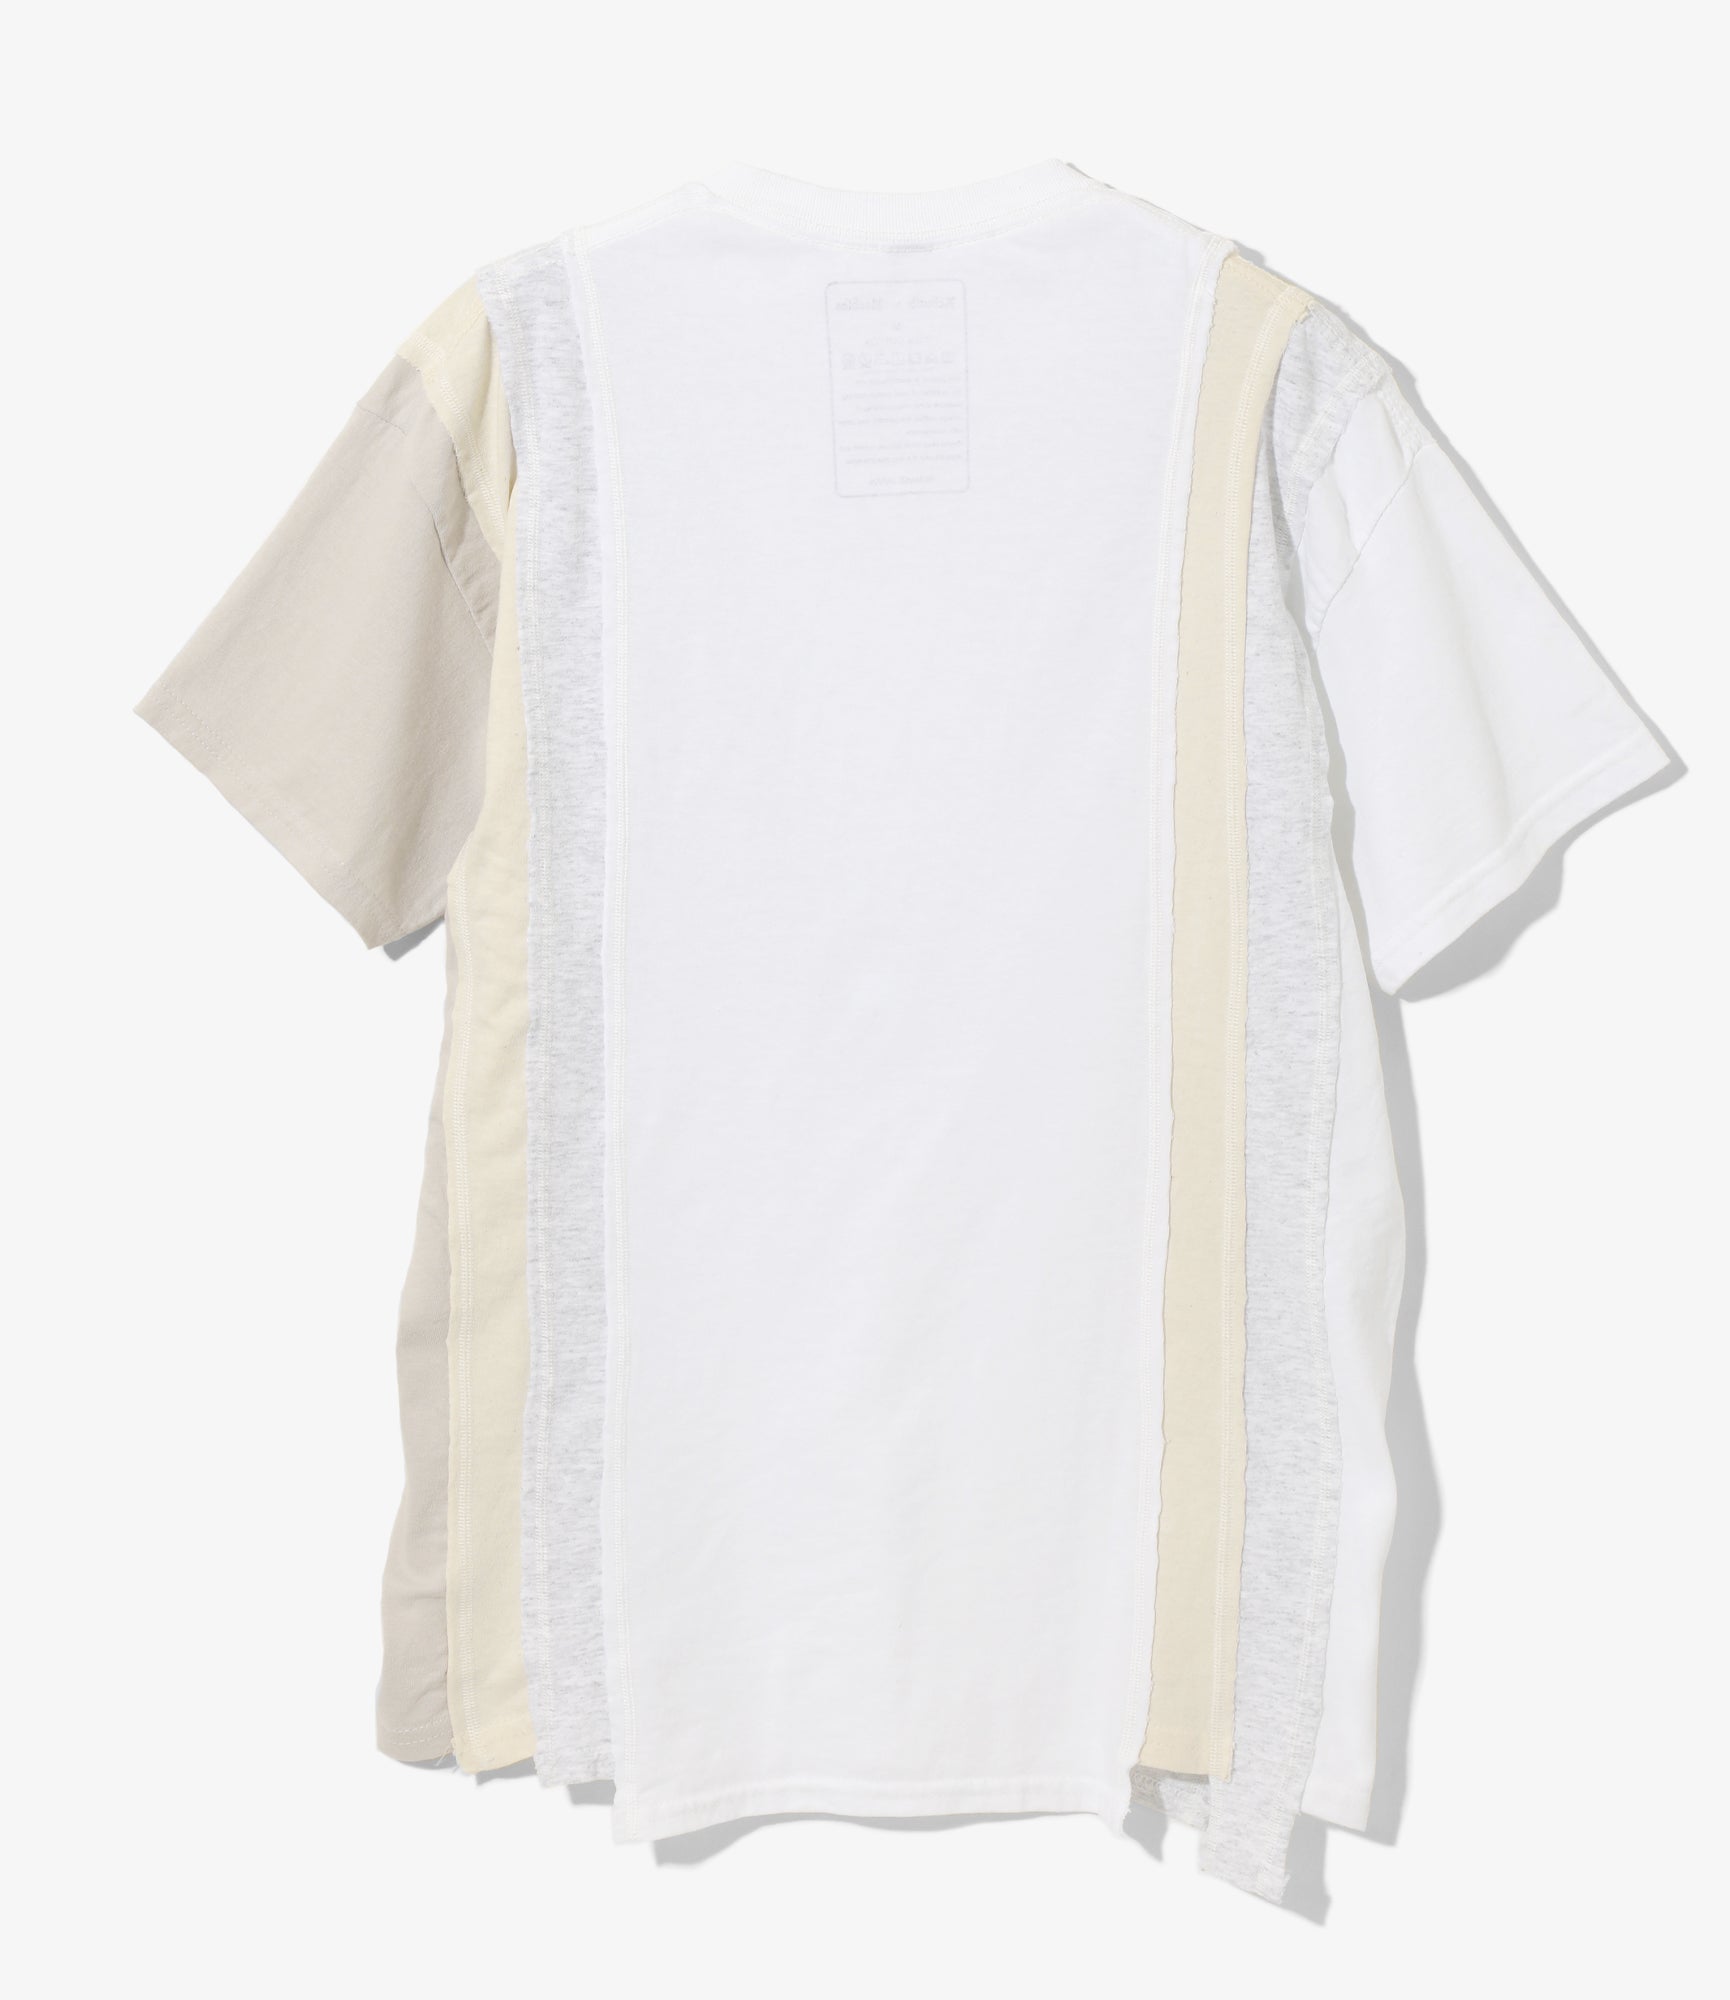 Needles x DC Shoes - 7 Cuts S/S Tee - Ivory - Solid / Fade